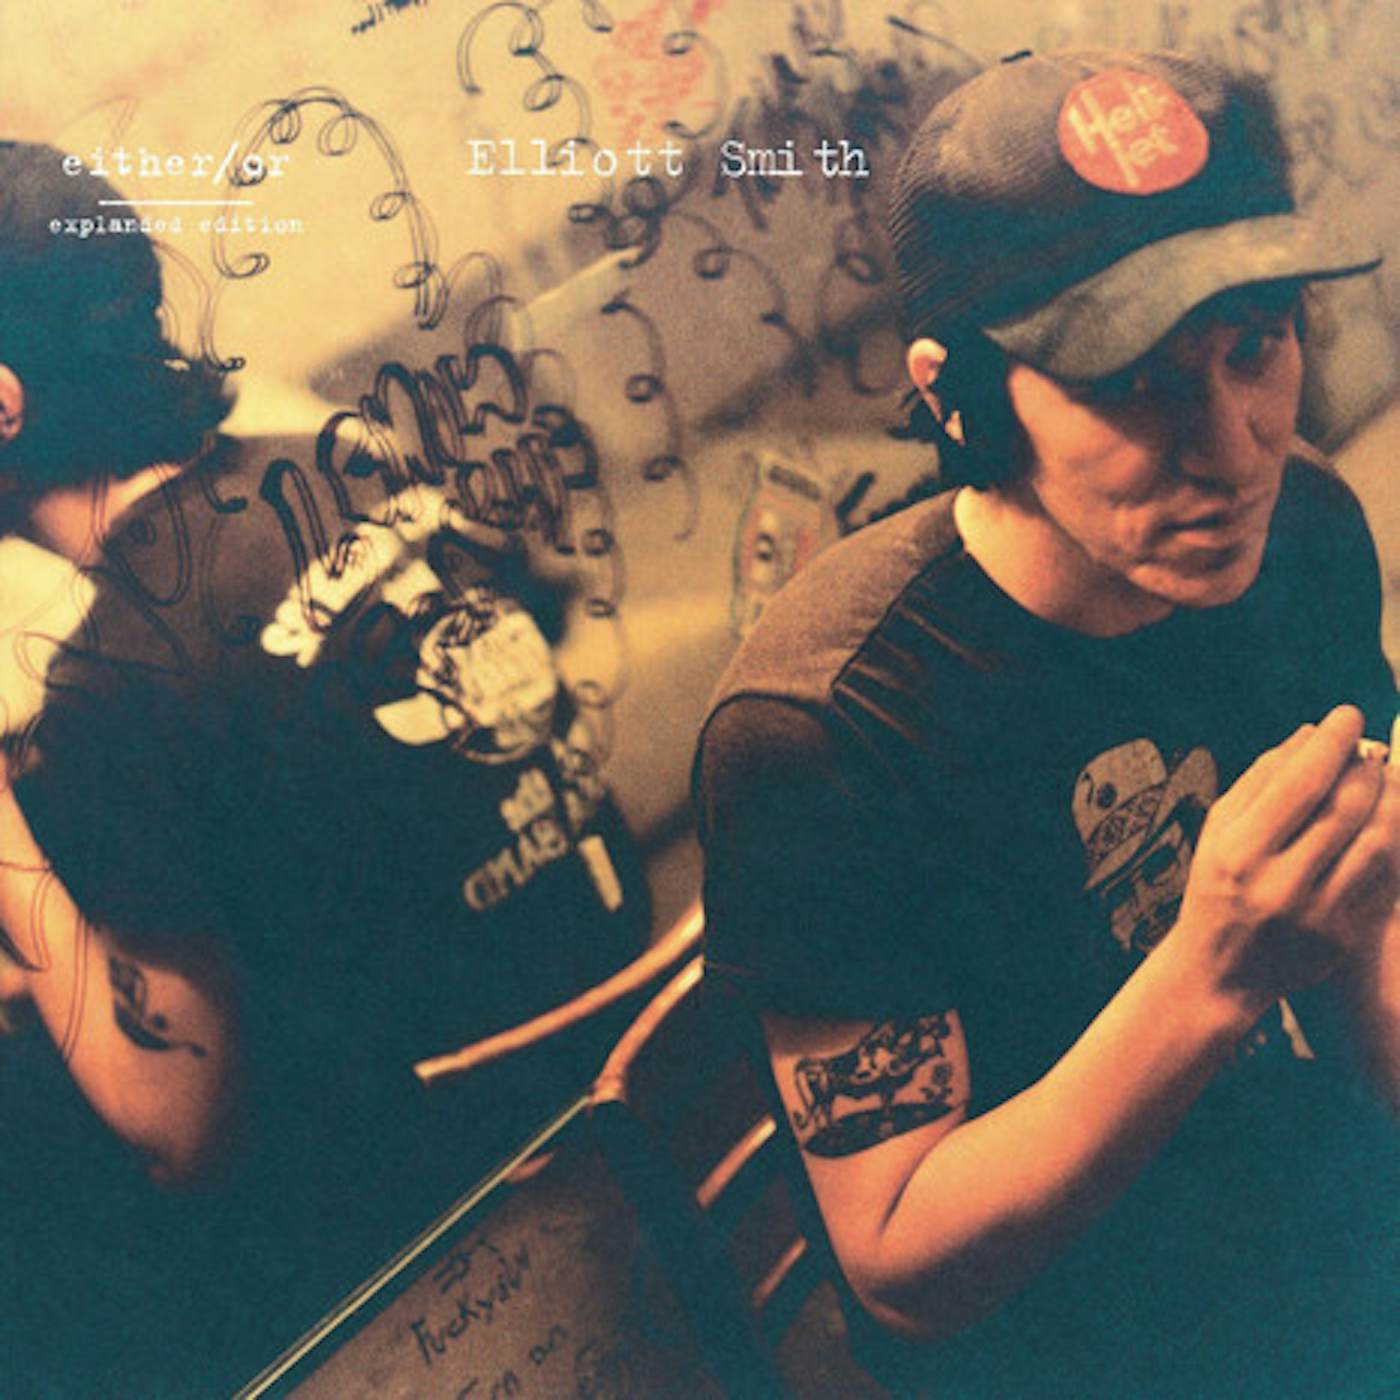 Elliott Smith Either / Or (Expanded Edition) Vinyl Record